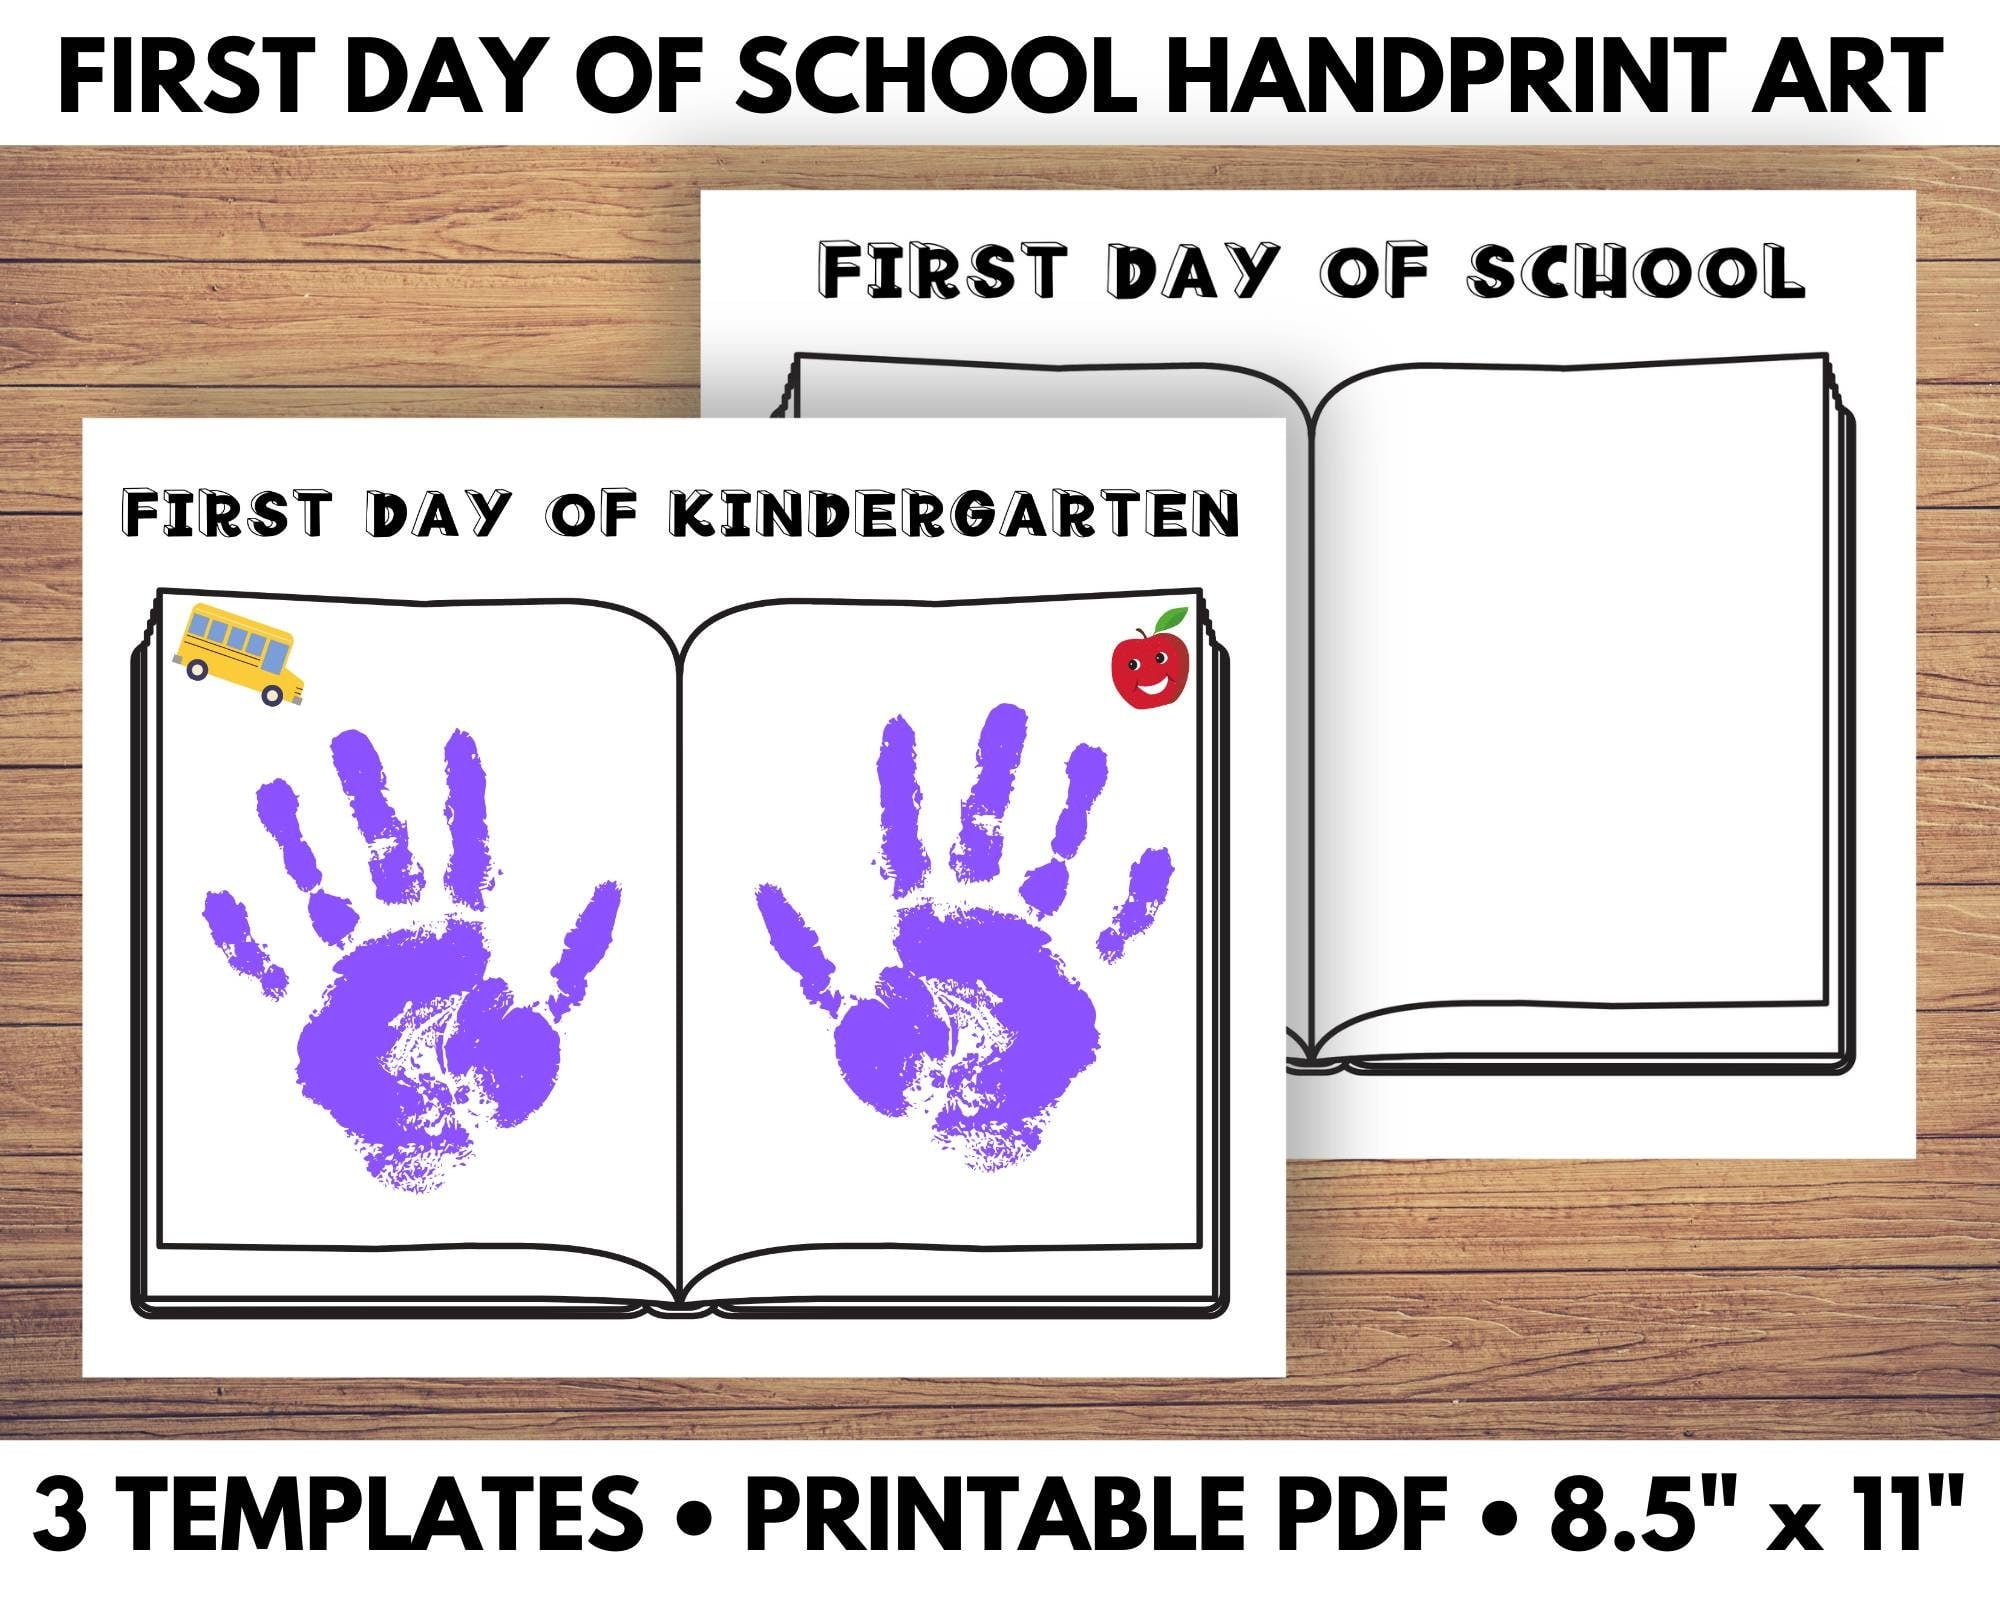 printable-my-first-day-handprint-template-free-printable